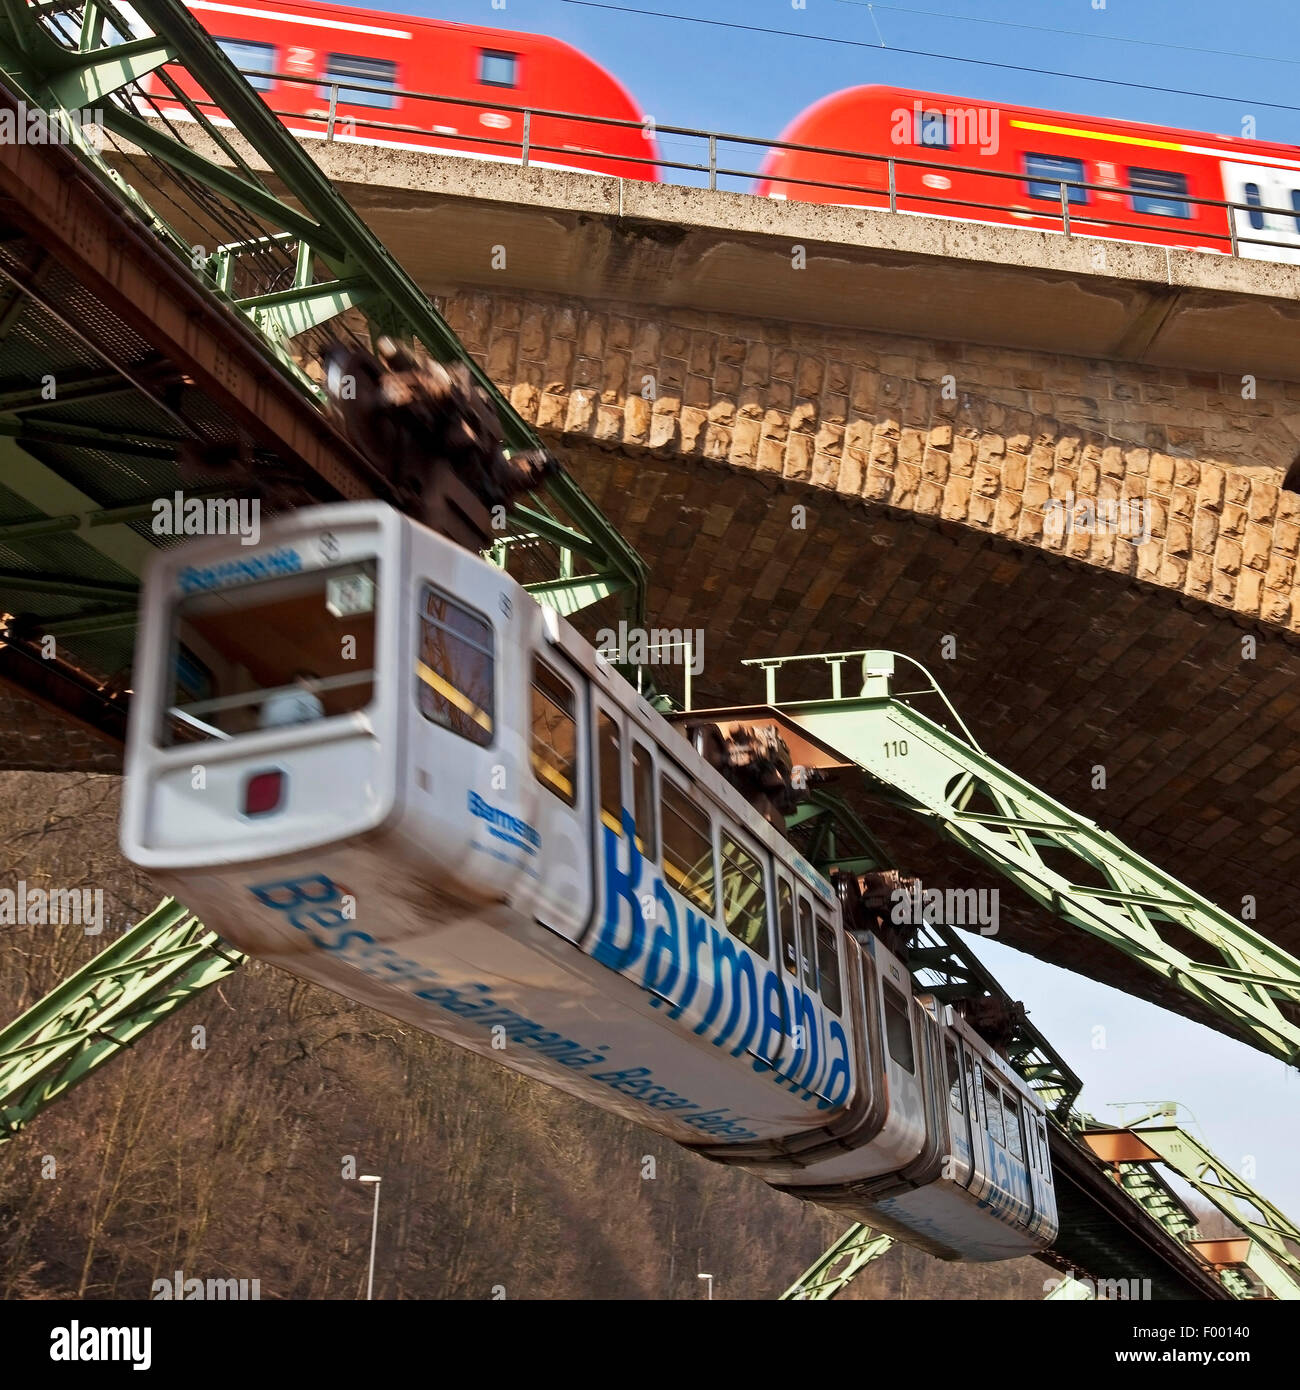 Wuppertal Suspension Railway and urban train, Germany, North Rhine-Westphalia, Bergisches Land, Wuppertal Stock Photo